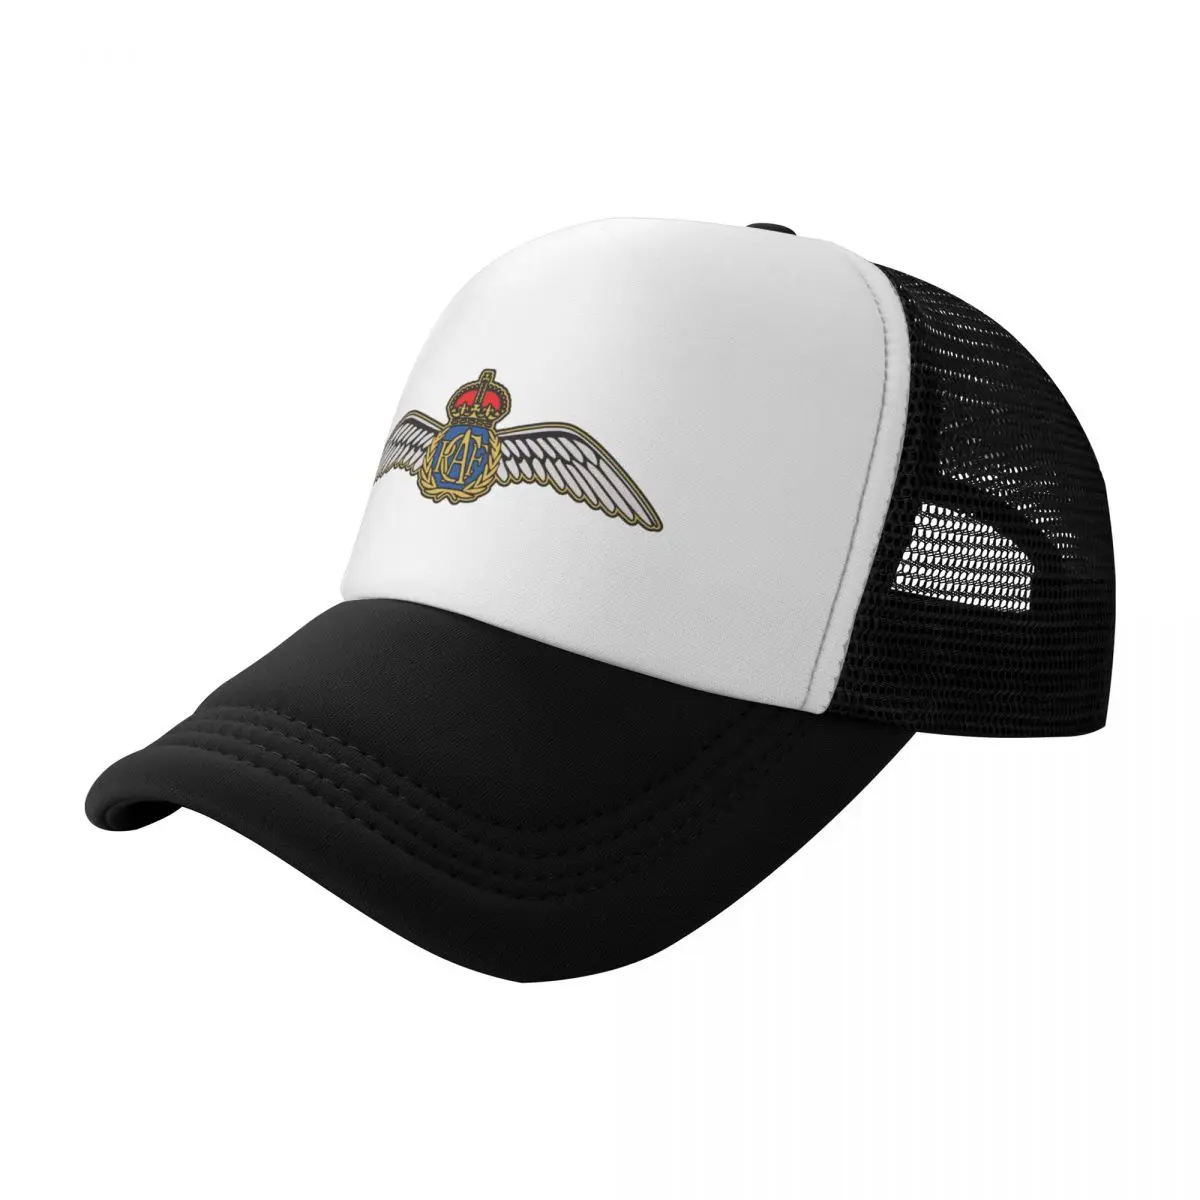 

RCAF Wings Baseball Cap Snapback Cap New In The Hat Thermal Visor Luxury Man Hat Women's Hats For The Sun Men's